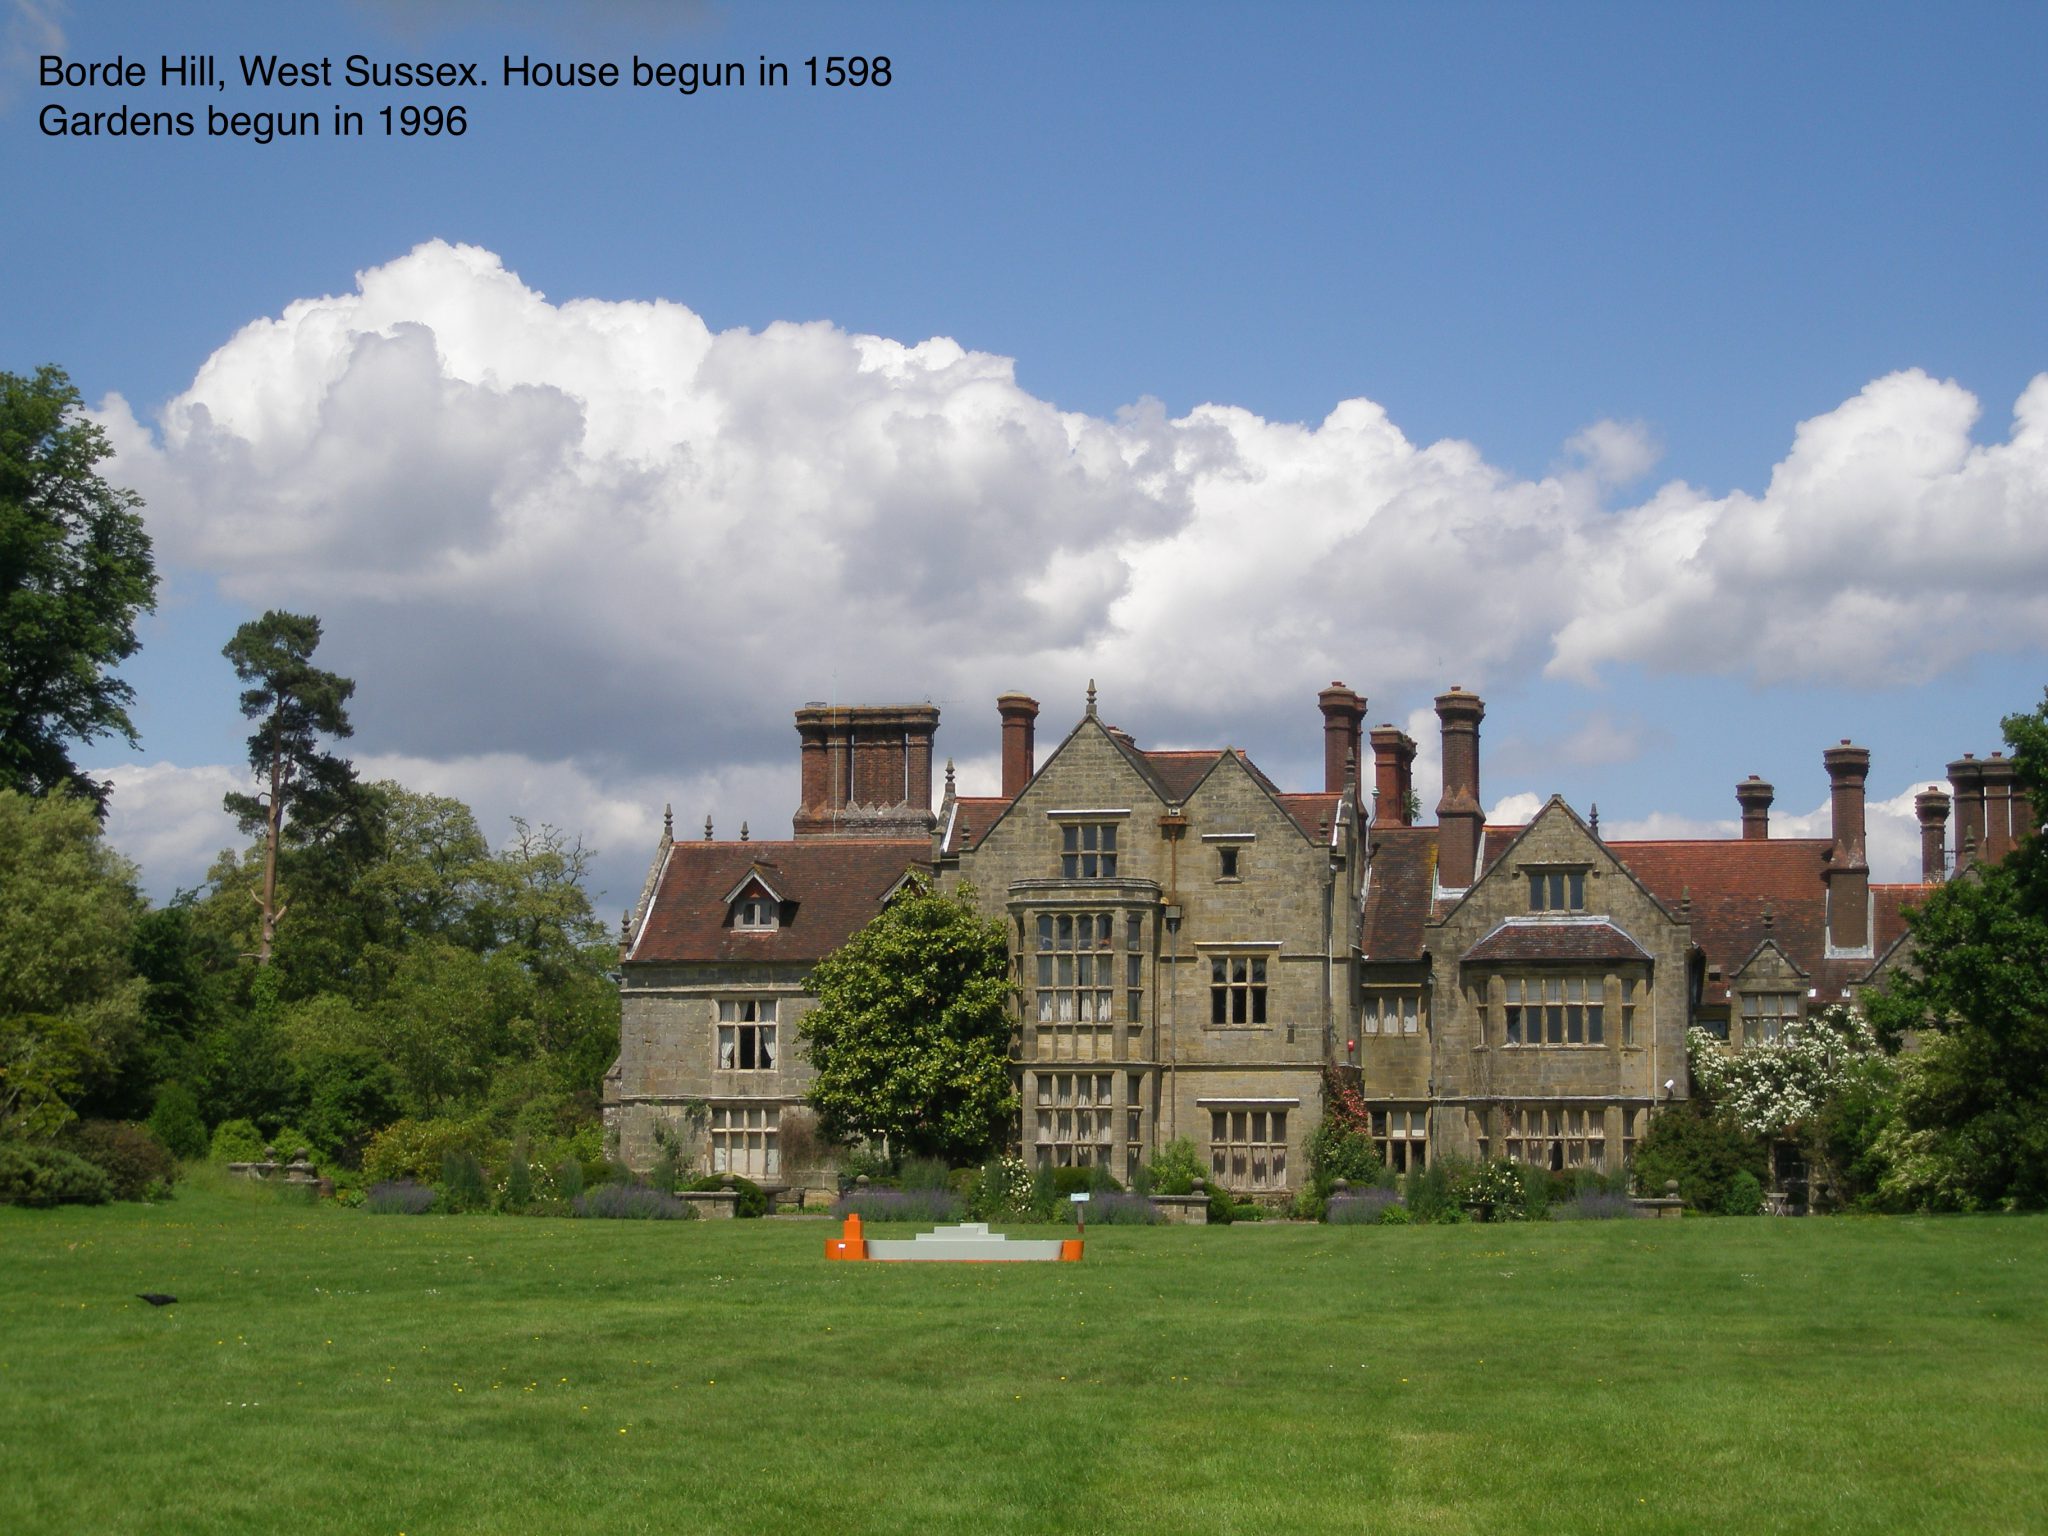 The Main House, and South Lawn. I took this photo on June 5, 2014.